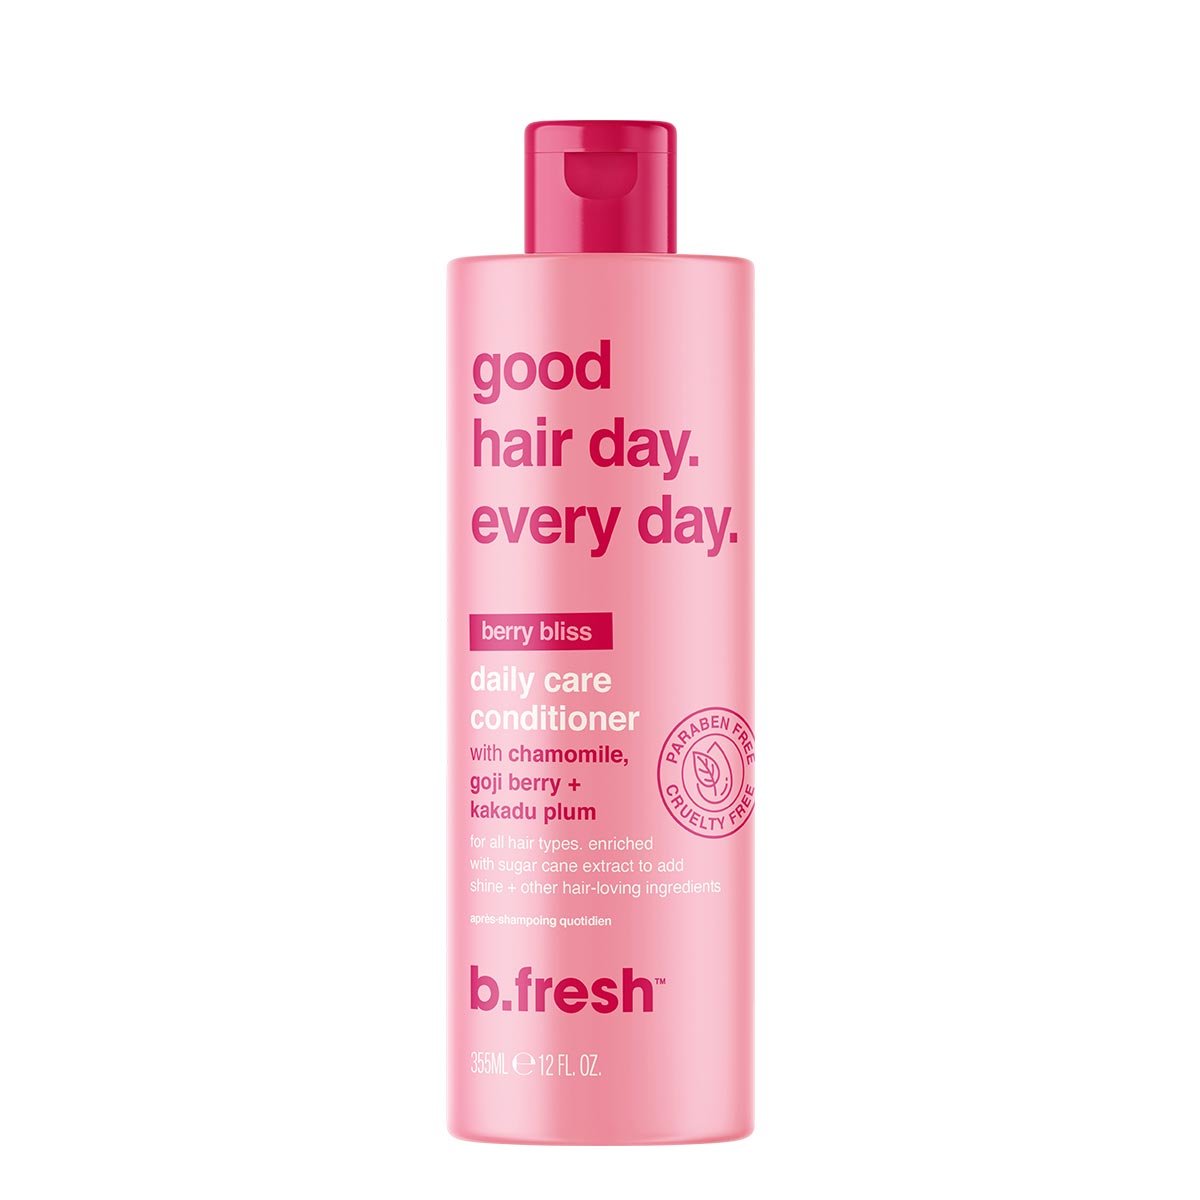 b.fresh Good Hair Day. Every Day. Daily Care Conditioner 355 ml